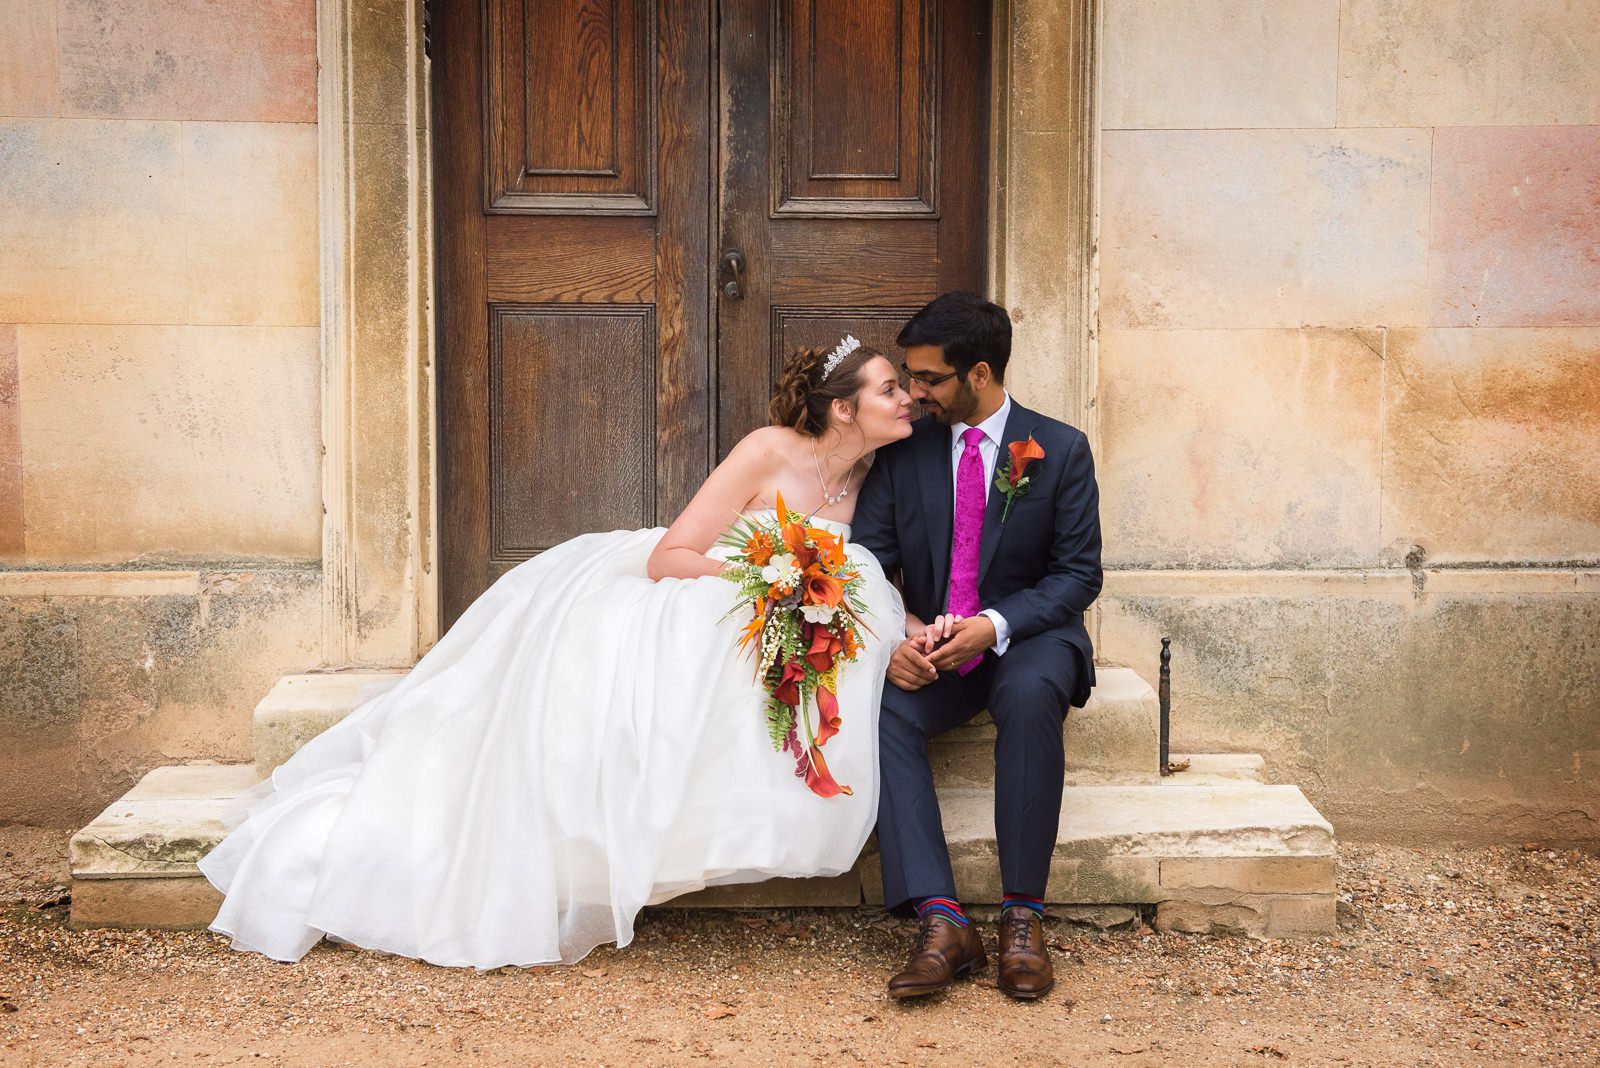 Getting Married at Downing College Cambridge